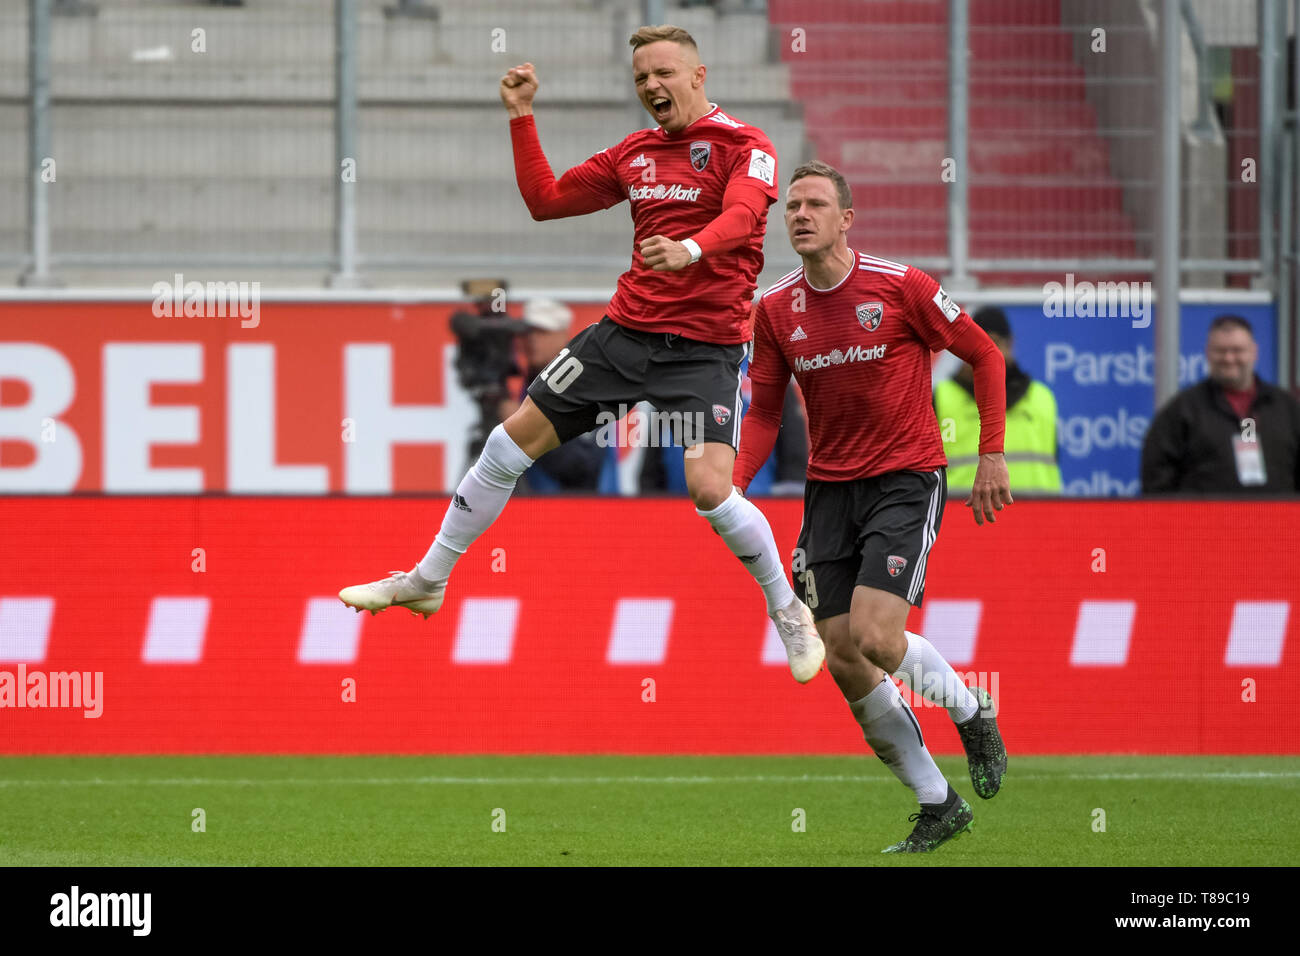 Ingolstadt, Germany. 12th May, 2019. Soccer: 2nd Bundesliga, FC Ingolstadt  04 - Darmstadt 98, 33rd matchday at Audi-Sportpark. Sonny Kittel from  Ingolstadt cheers after his goal to 1-0 against Darmstadt. Right teammate